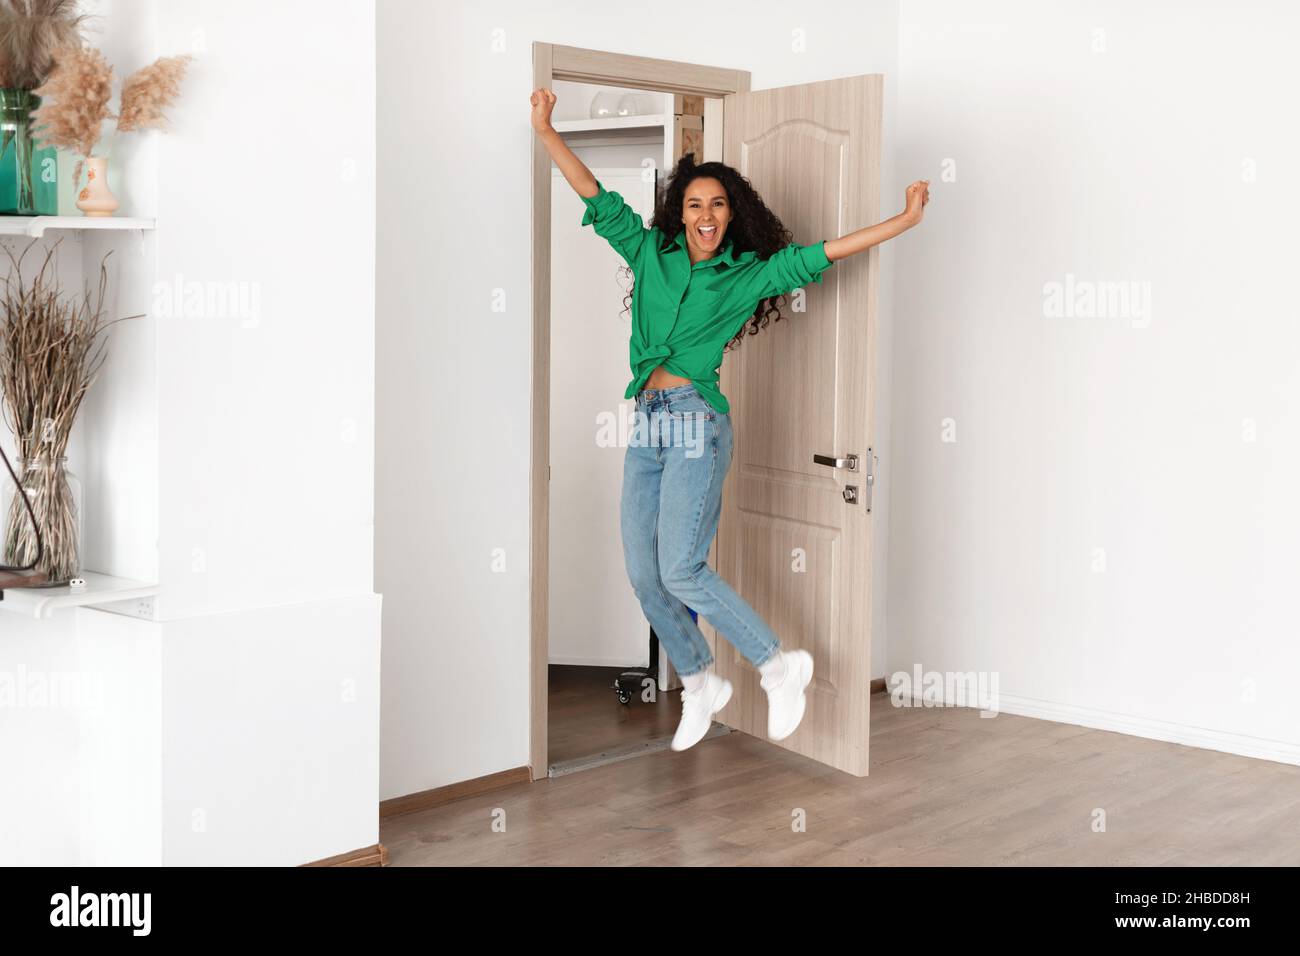 Portrait of excited emotional woman jumping in apartment Stock Photo